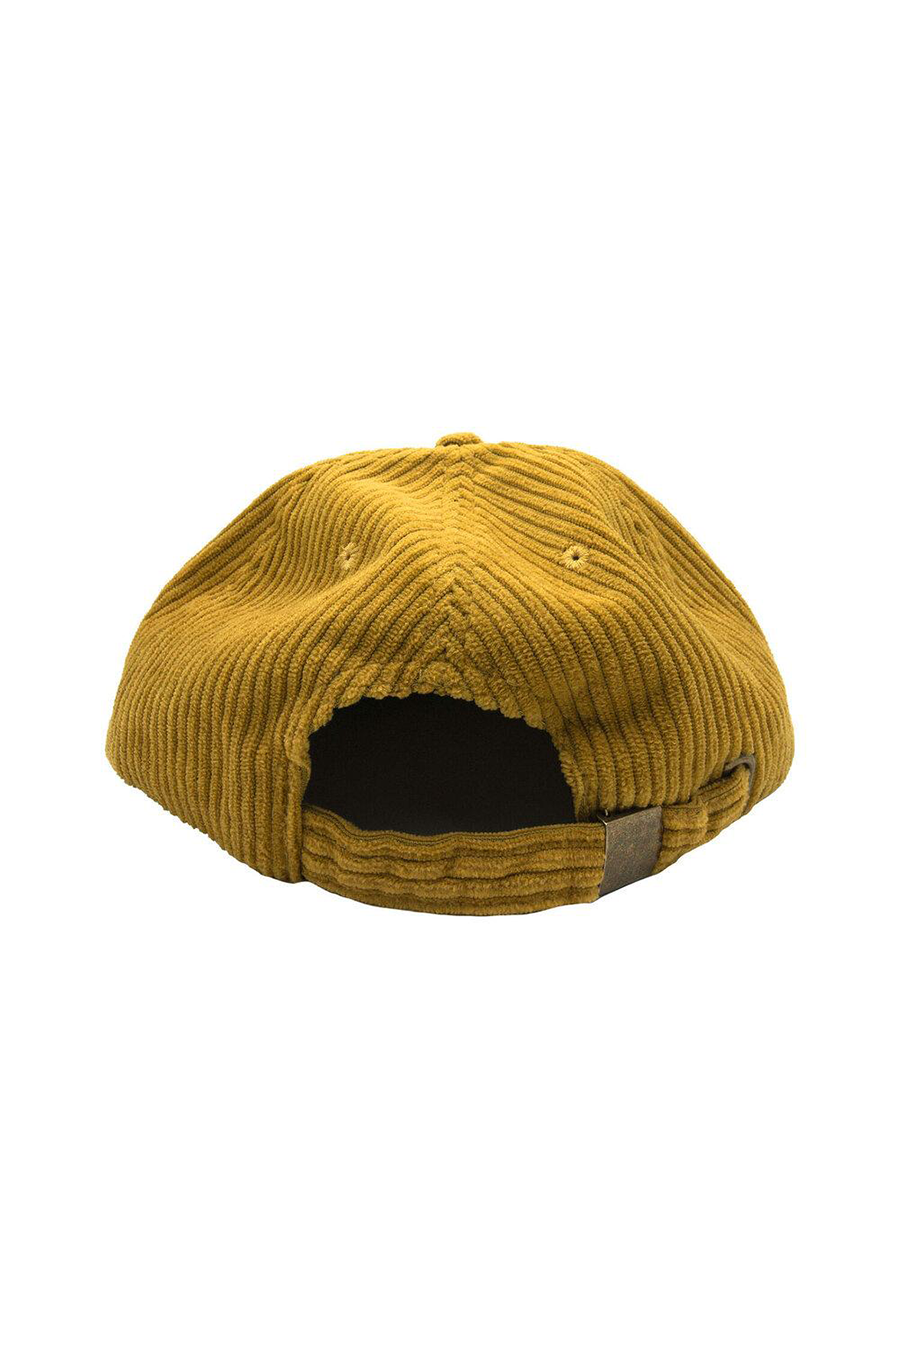 Don't Trip Fat Corduroy Hat | Mustard - Main Image Number 2 of 2